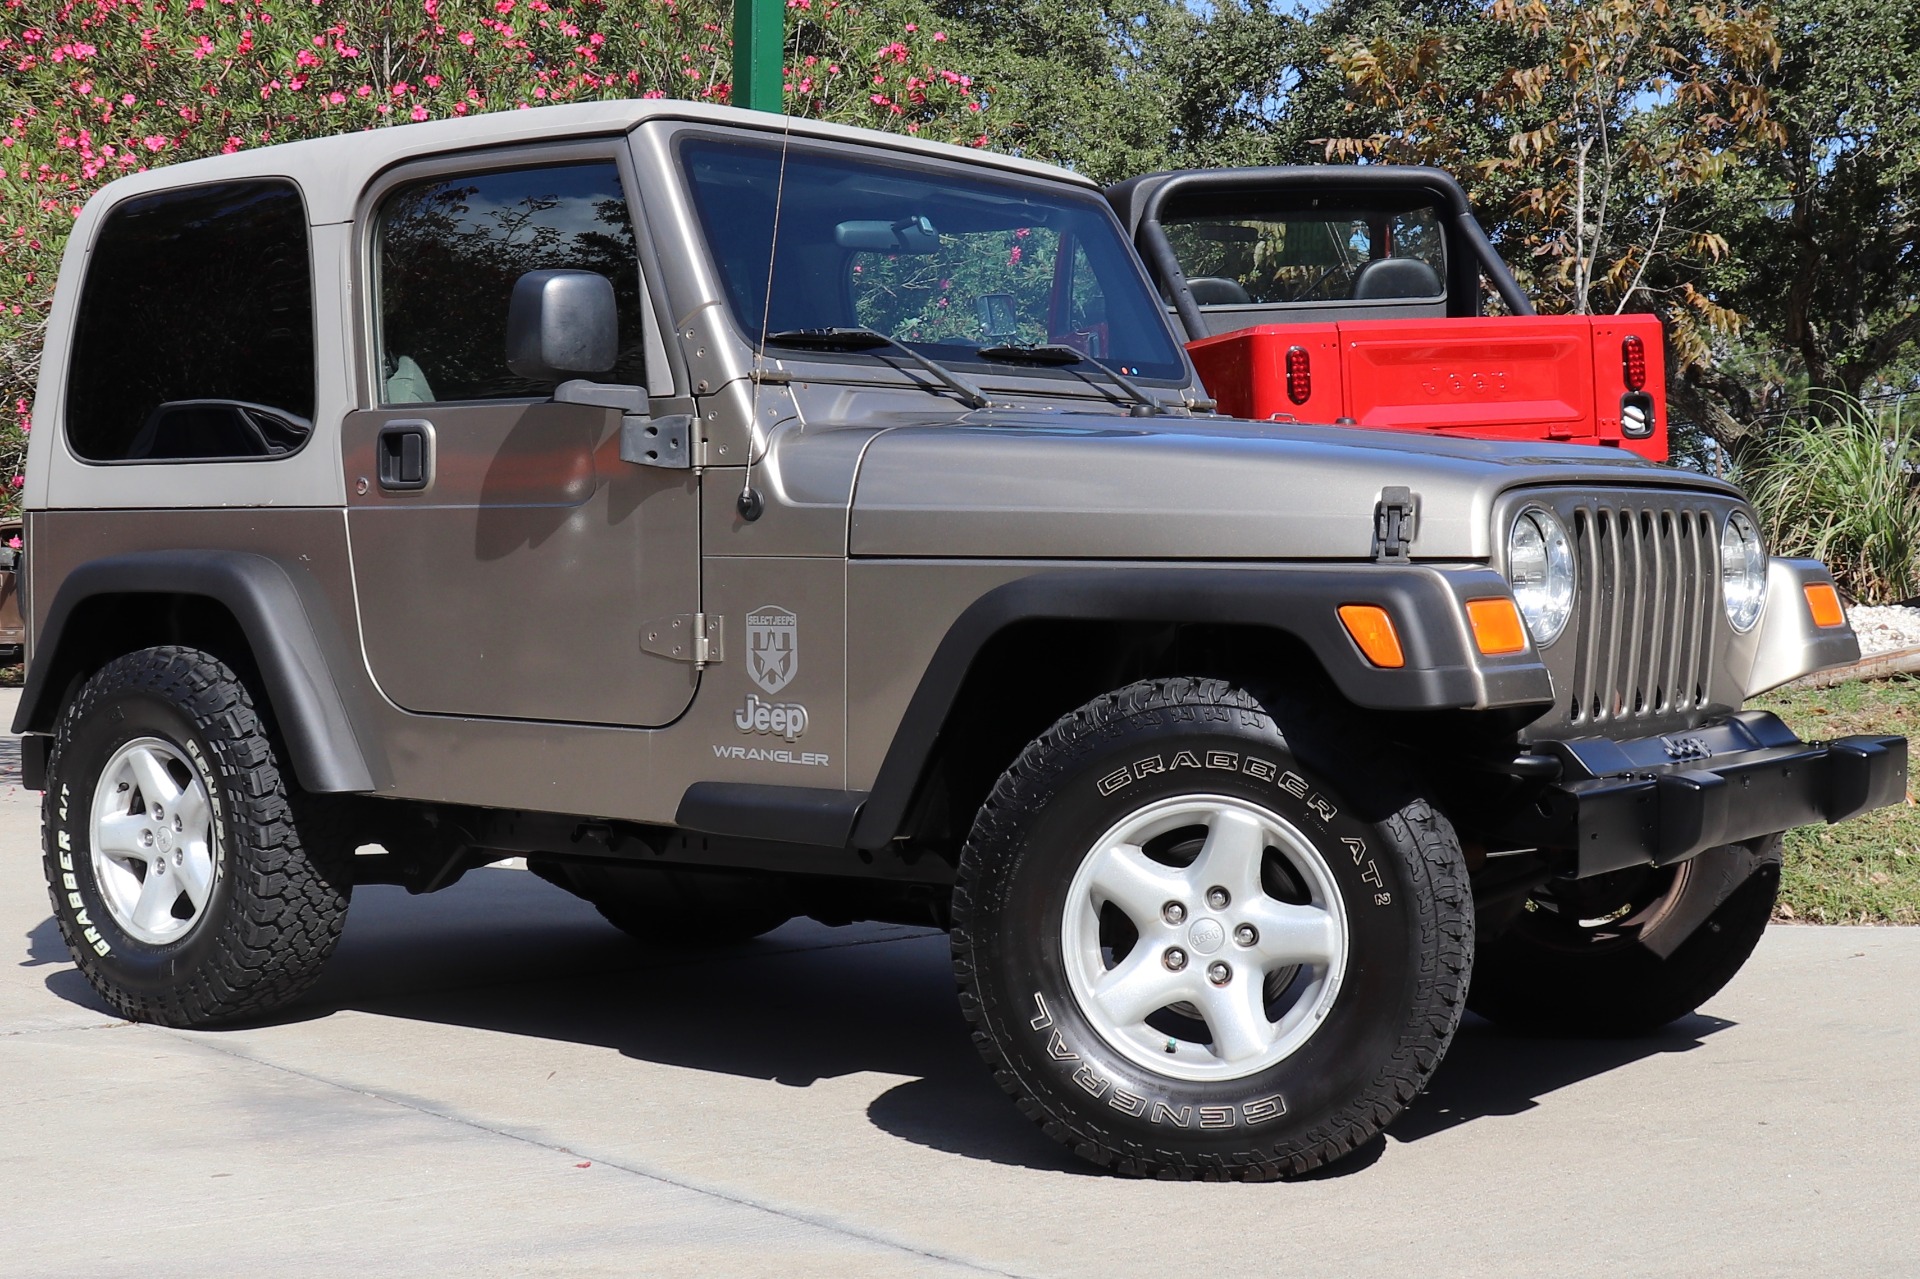 Used 2006 Jeep Wrangler X For Sale ($14,995) | Select Jeeps Inc. Stock  #726813